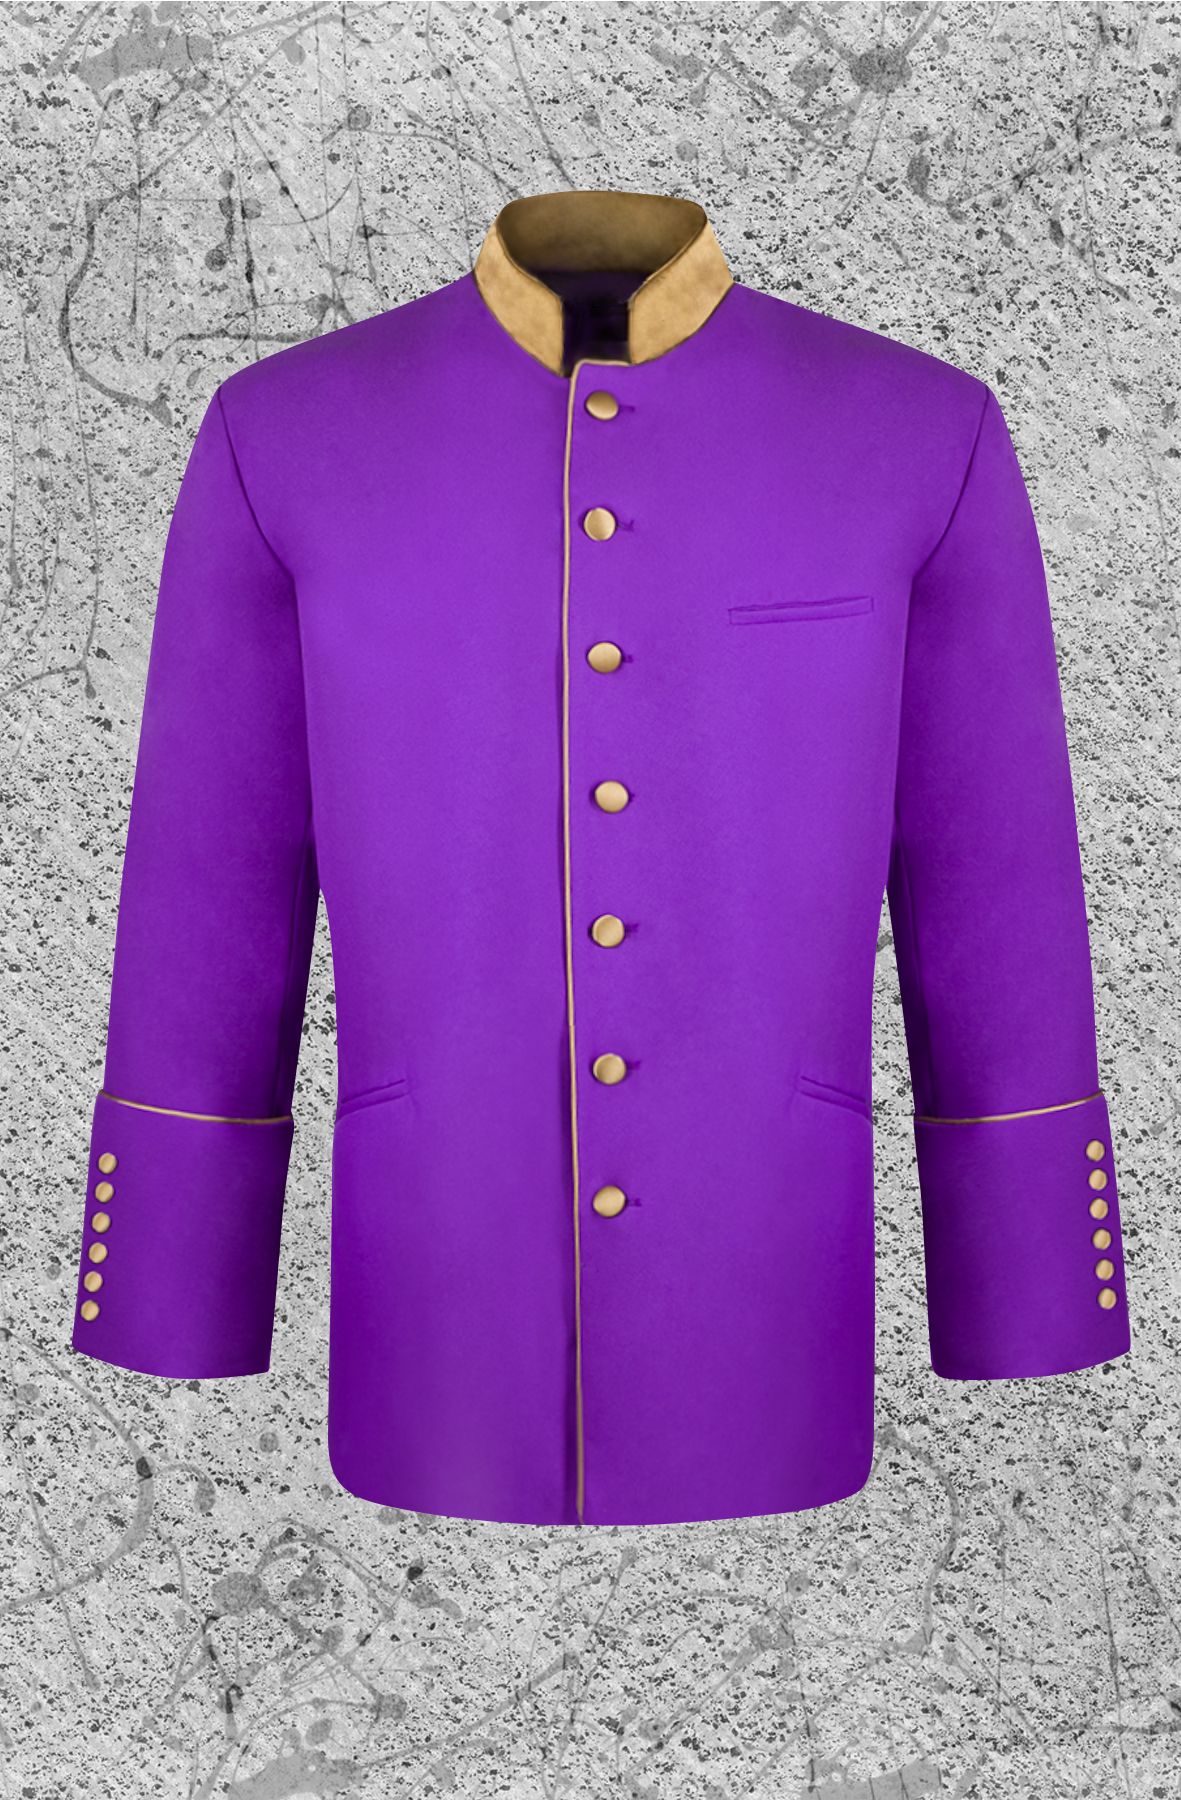 Men's Purple and Gold Clergy Frock Coat